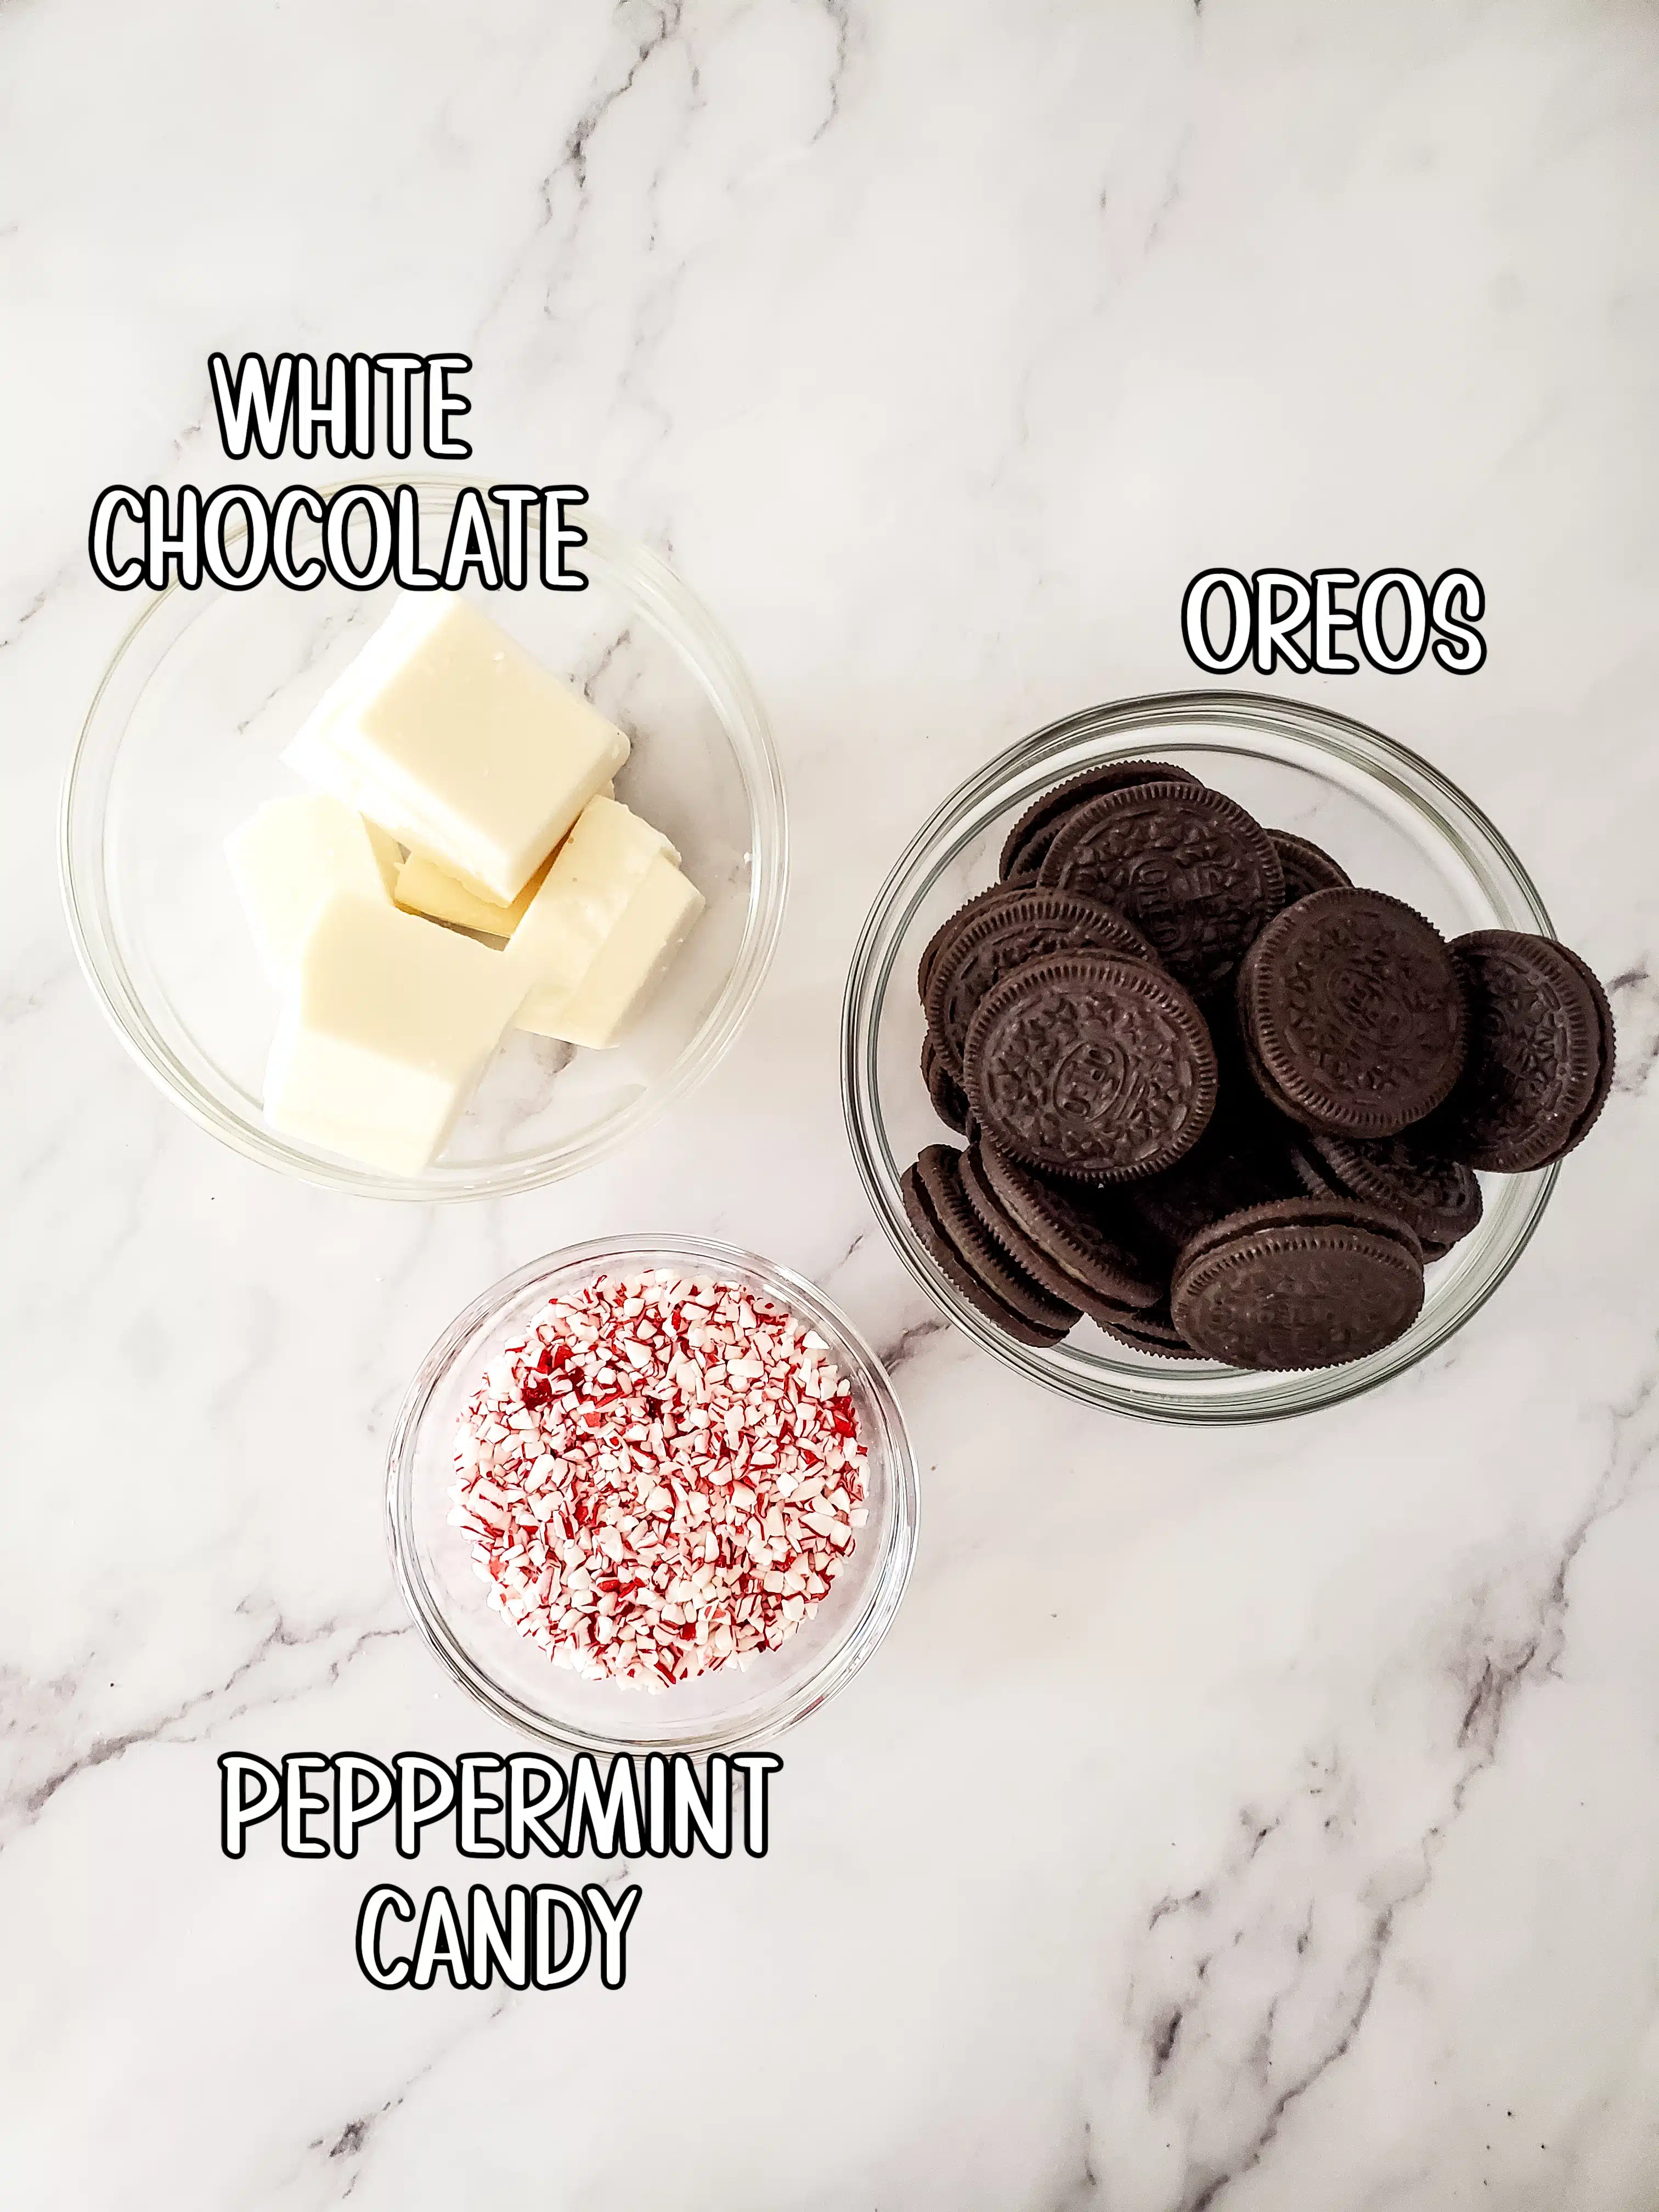 ingredients for dipped oreos